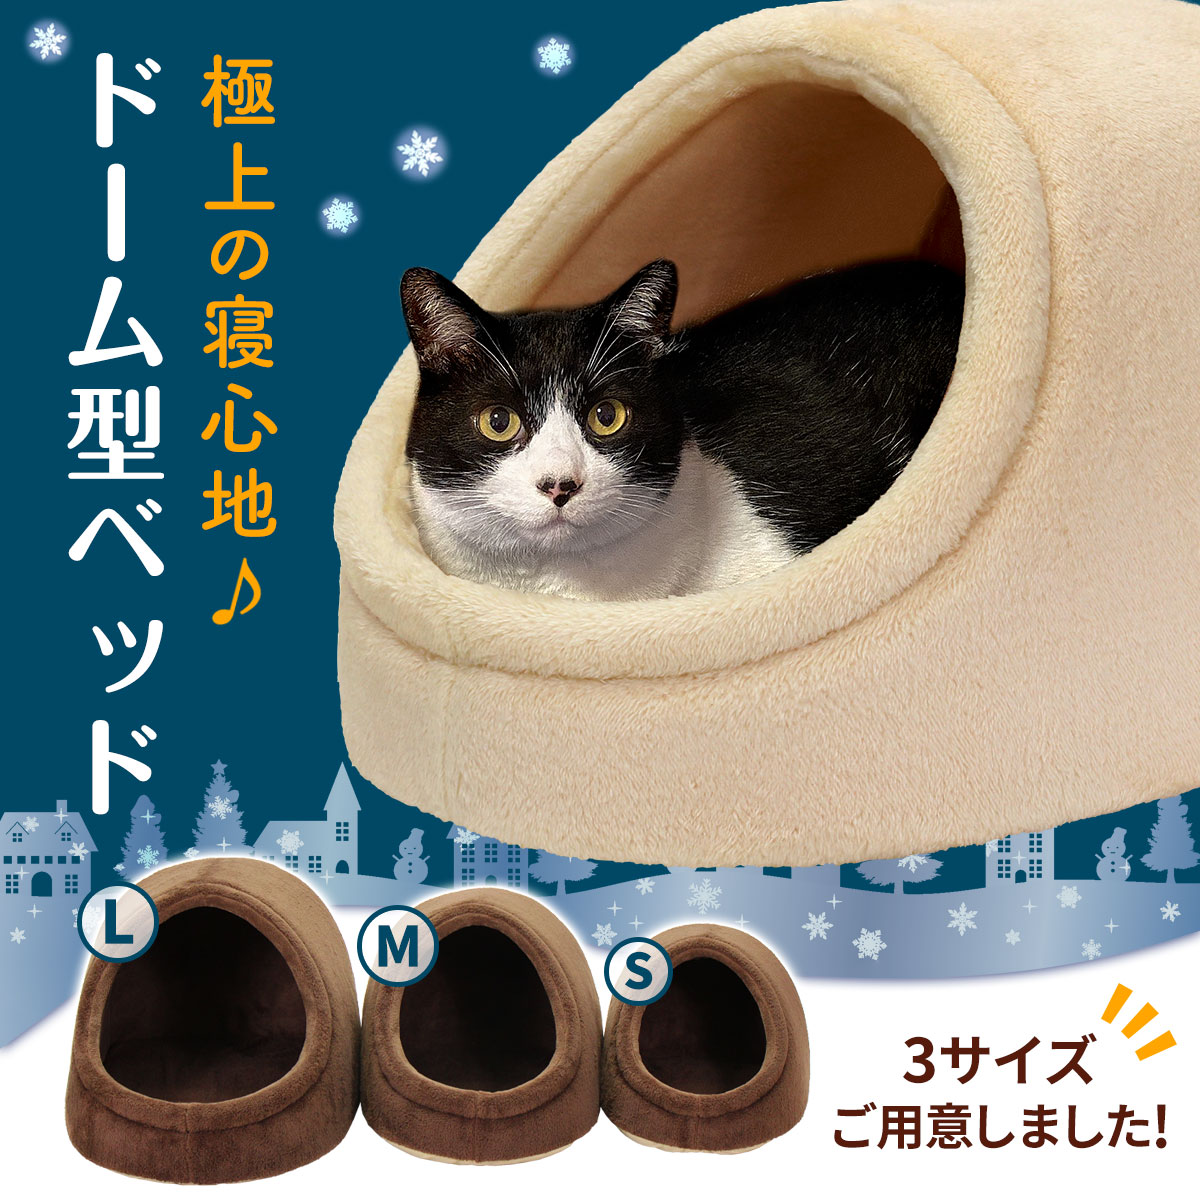  dome type pet bed dog cat bed winter stylish house warm pet soft boa dog for bed cat bed dome bed M size 